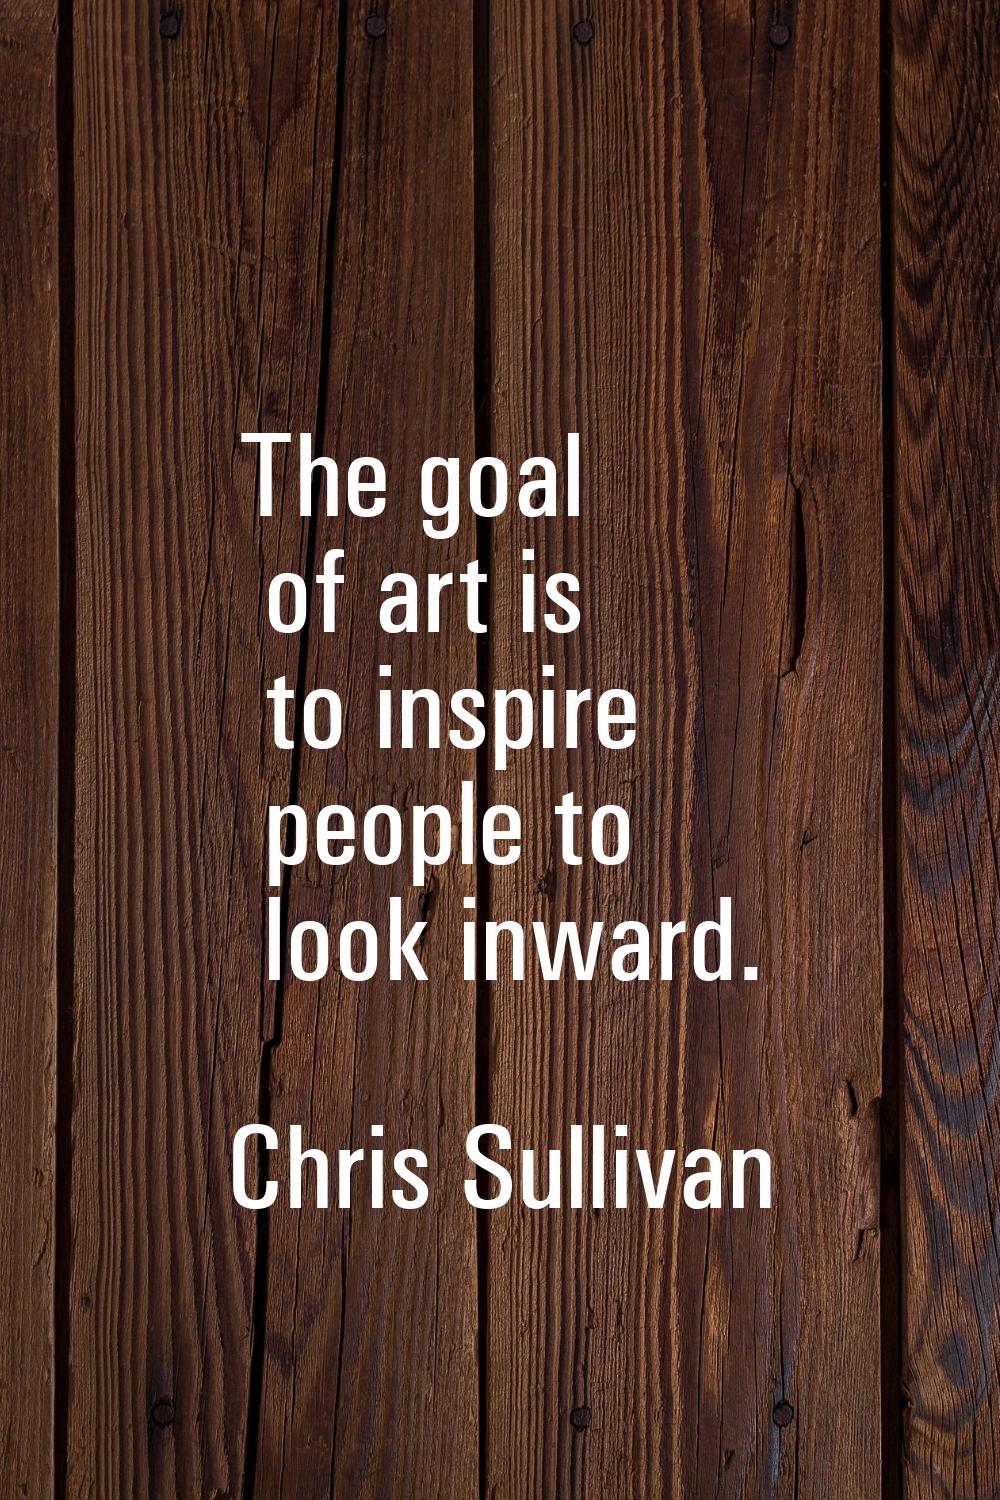 The goal of art is to inspire people to look inward.